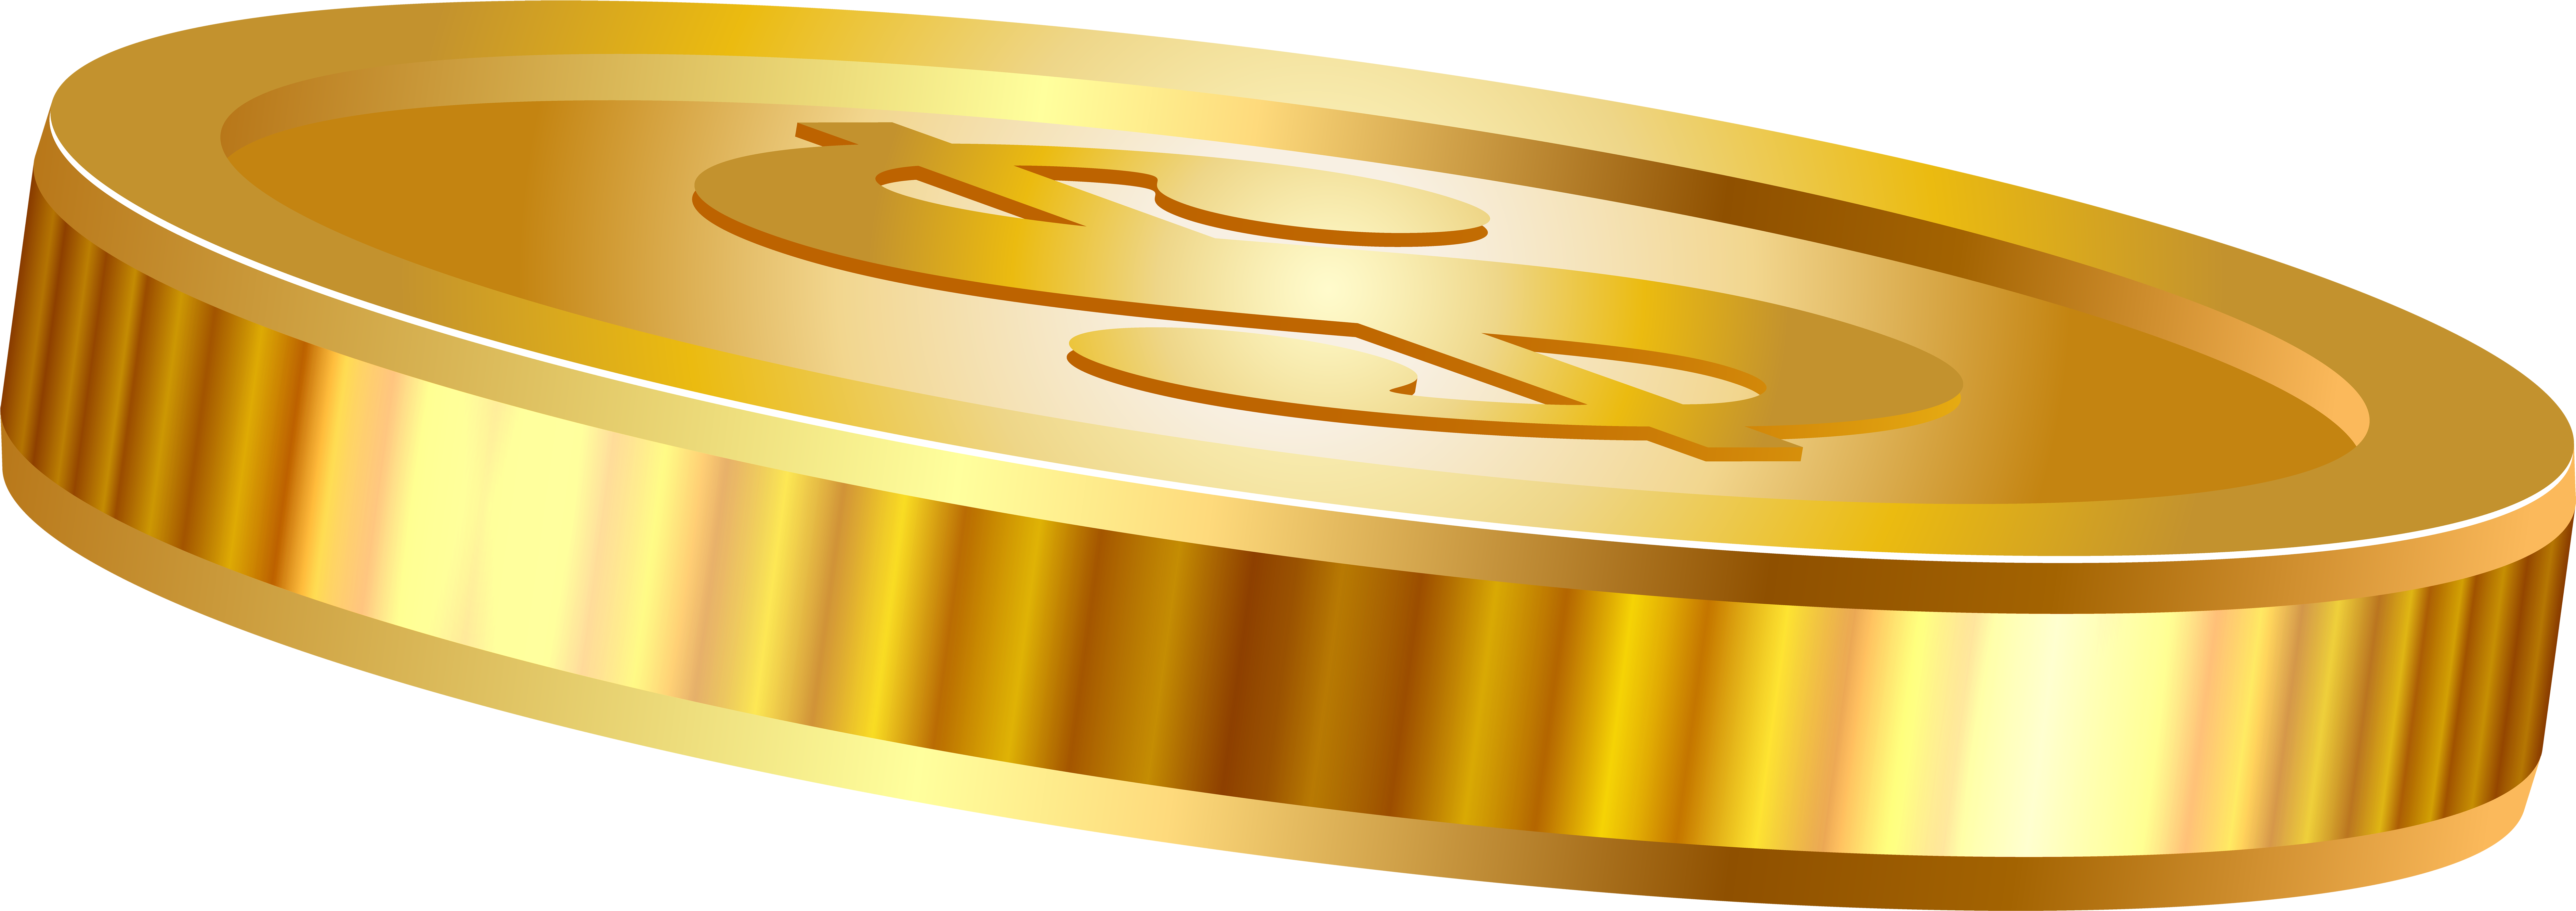 Download Coin Gold Transparent Png Clip Art Image - Coin Png PNG Image with  No Background 